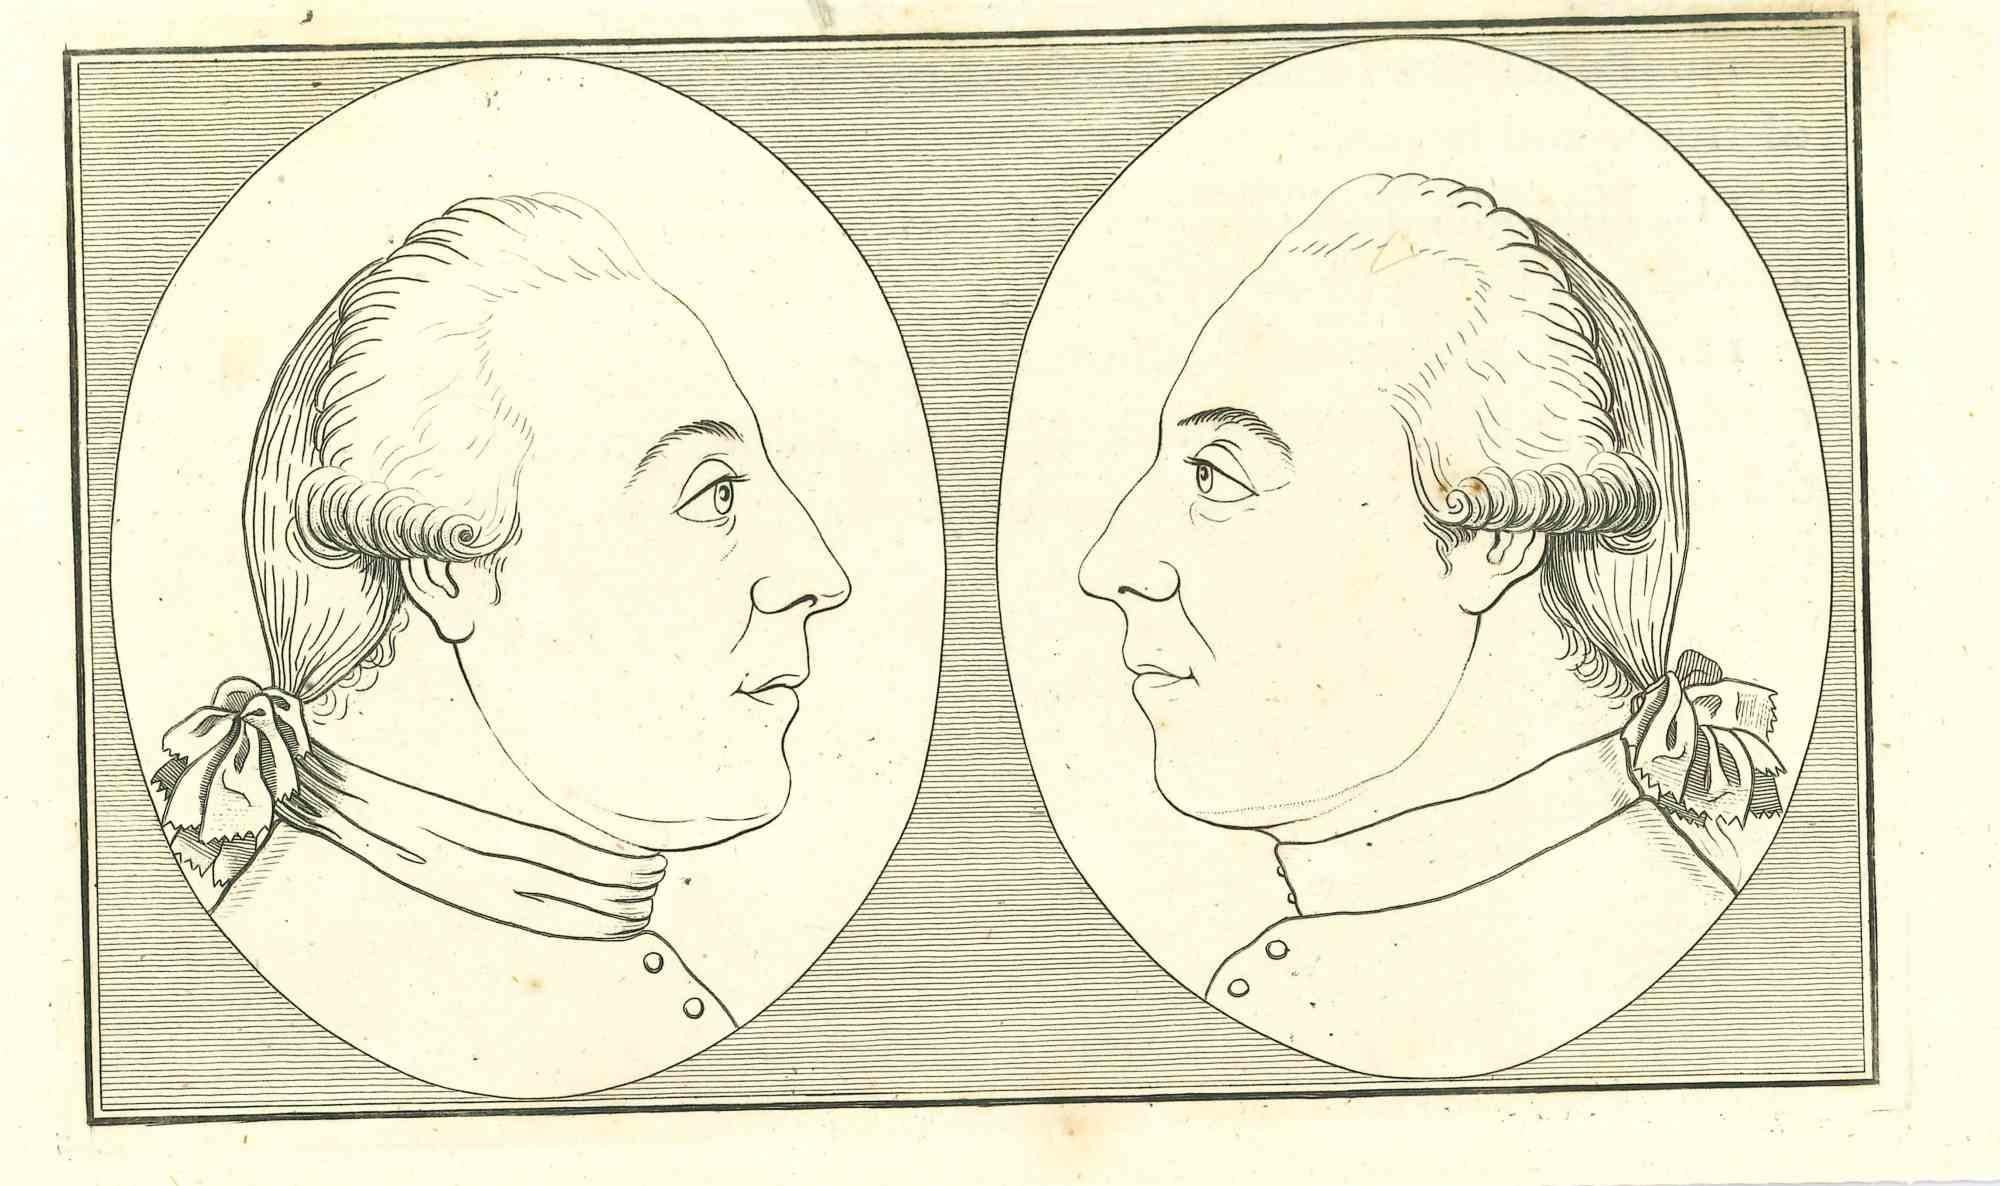 Portrait is an artwork realized by Thomas Holloway (1748 - 1827).

Original Etching from J.C. Lavater's "Essays on Physiognomy, Designed to promote the Knowledge and the Love of Mankind", London, Bensley, 1810. 

This artwork portrays two men. On